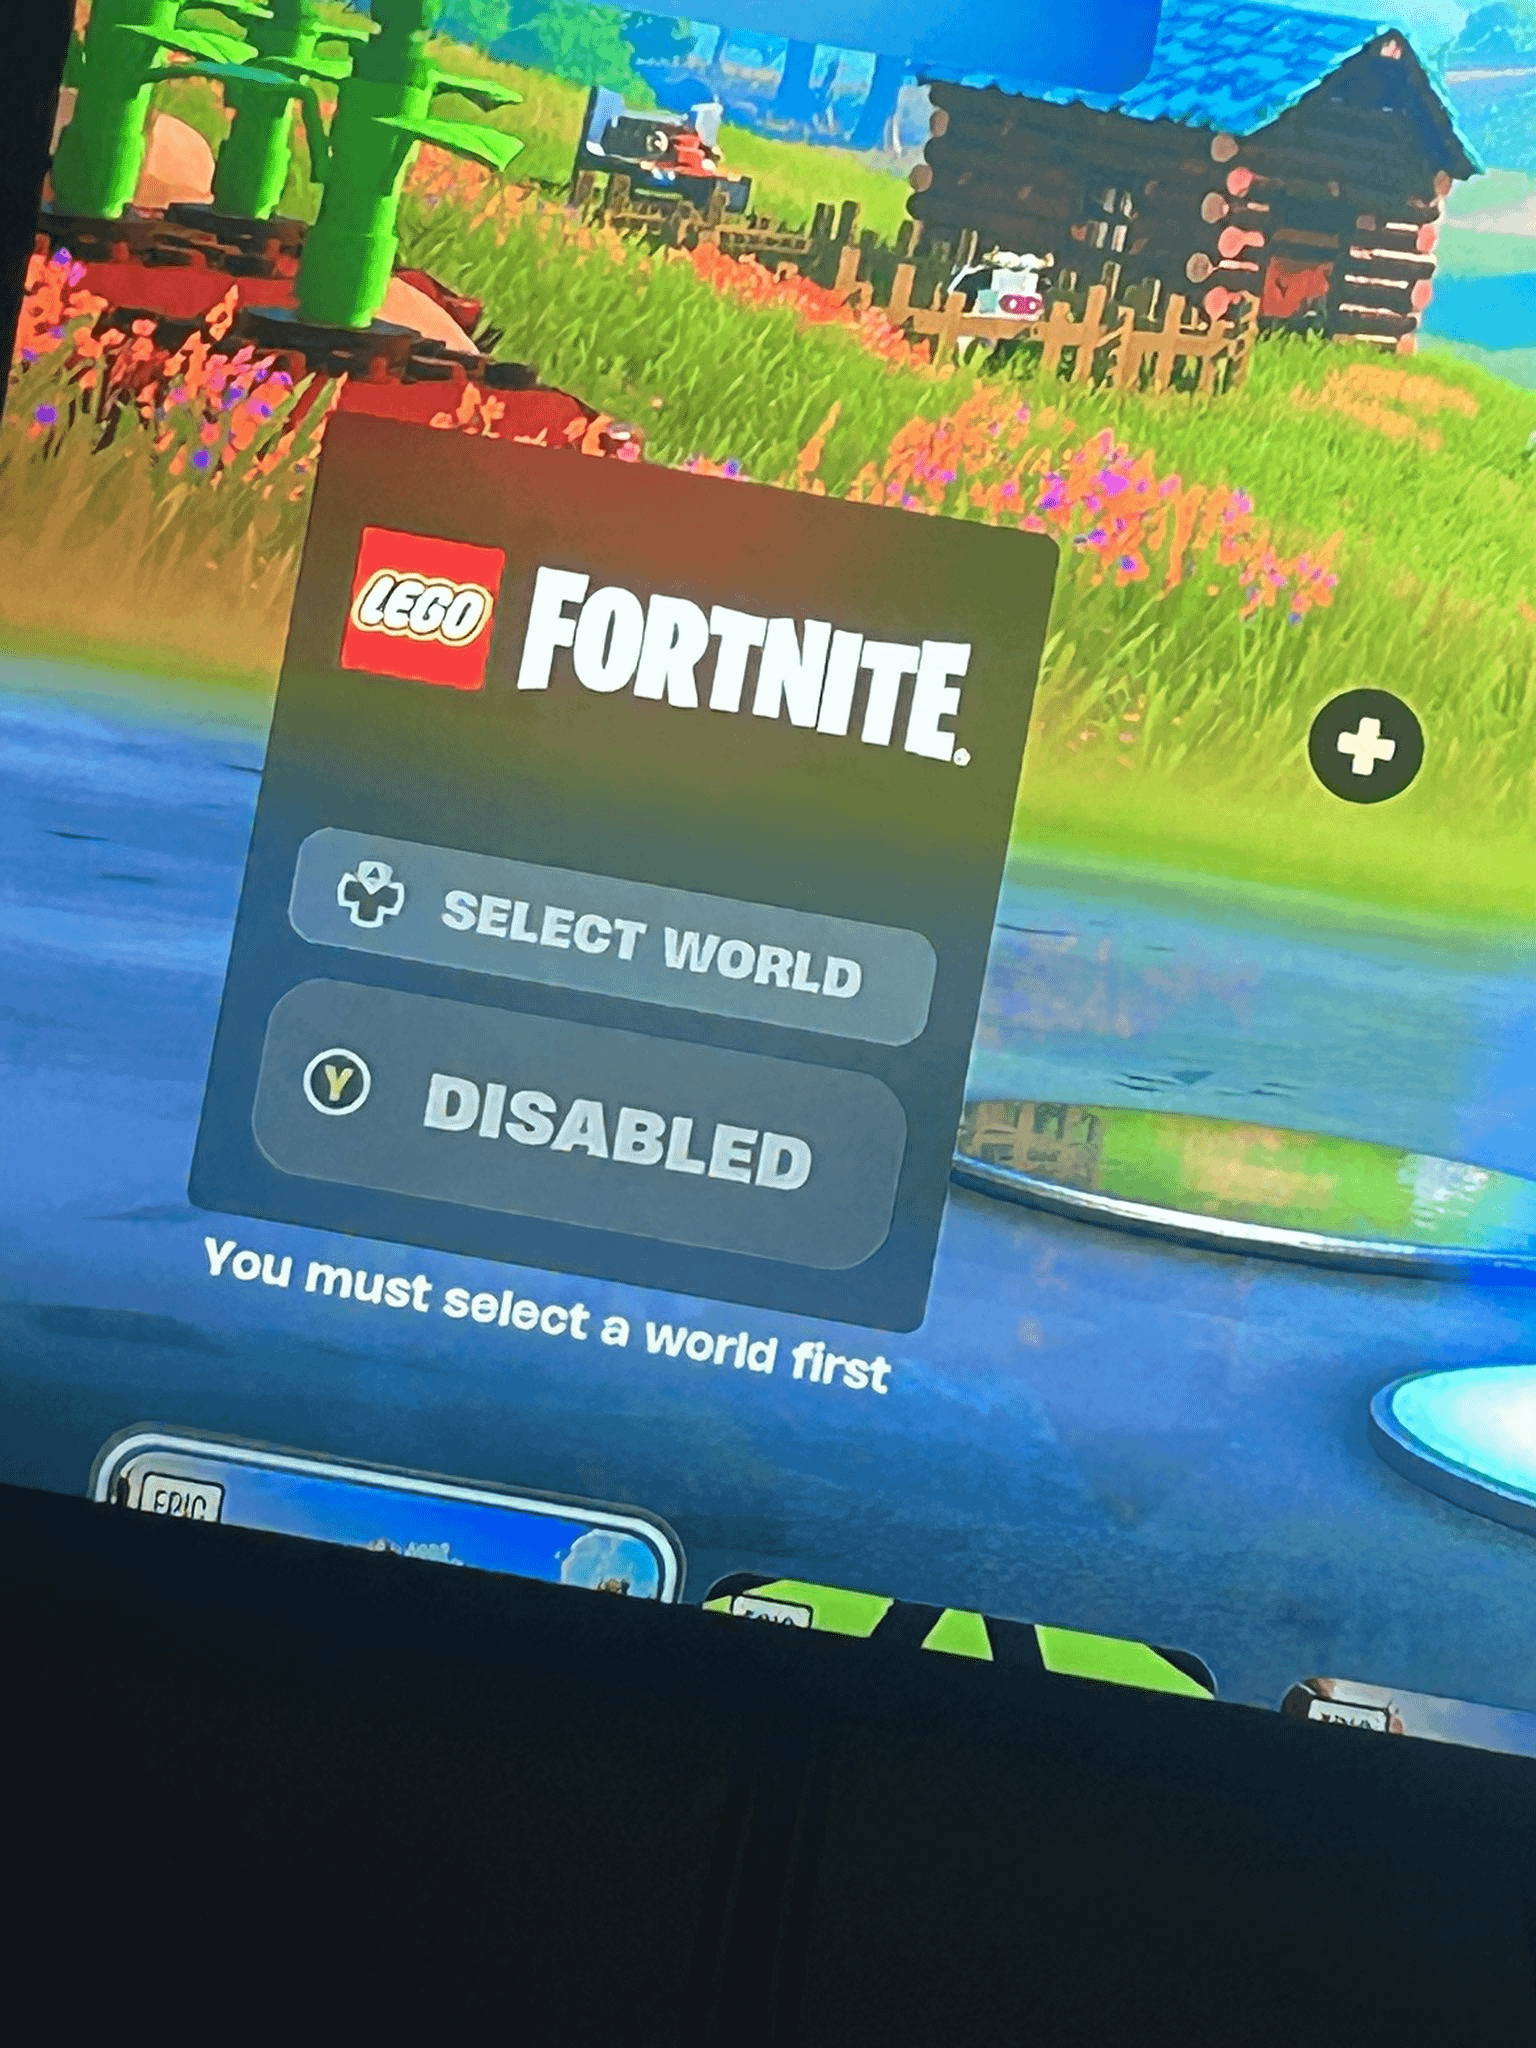 why is lego fortnite disabled